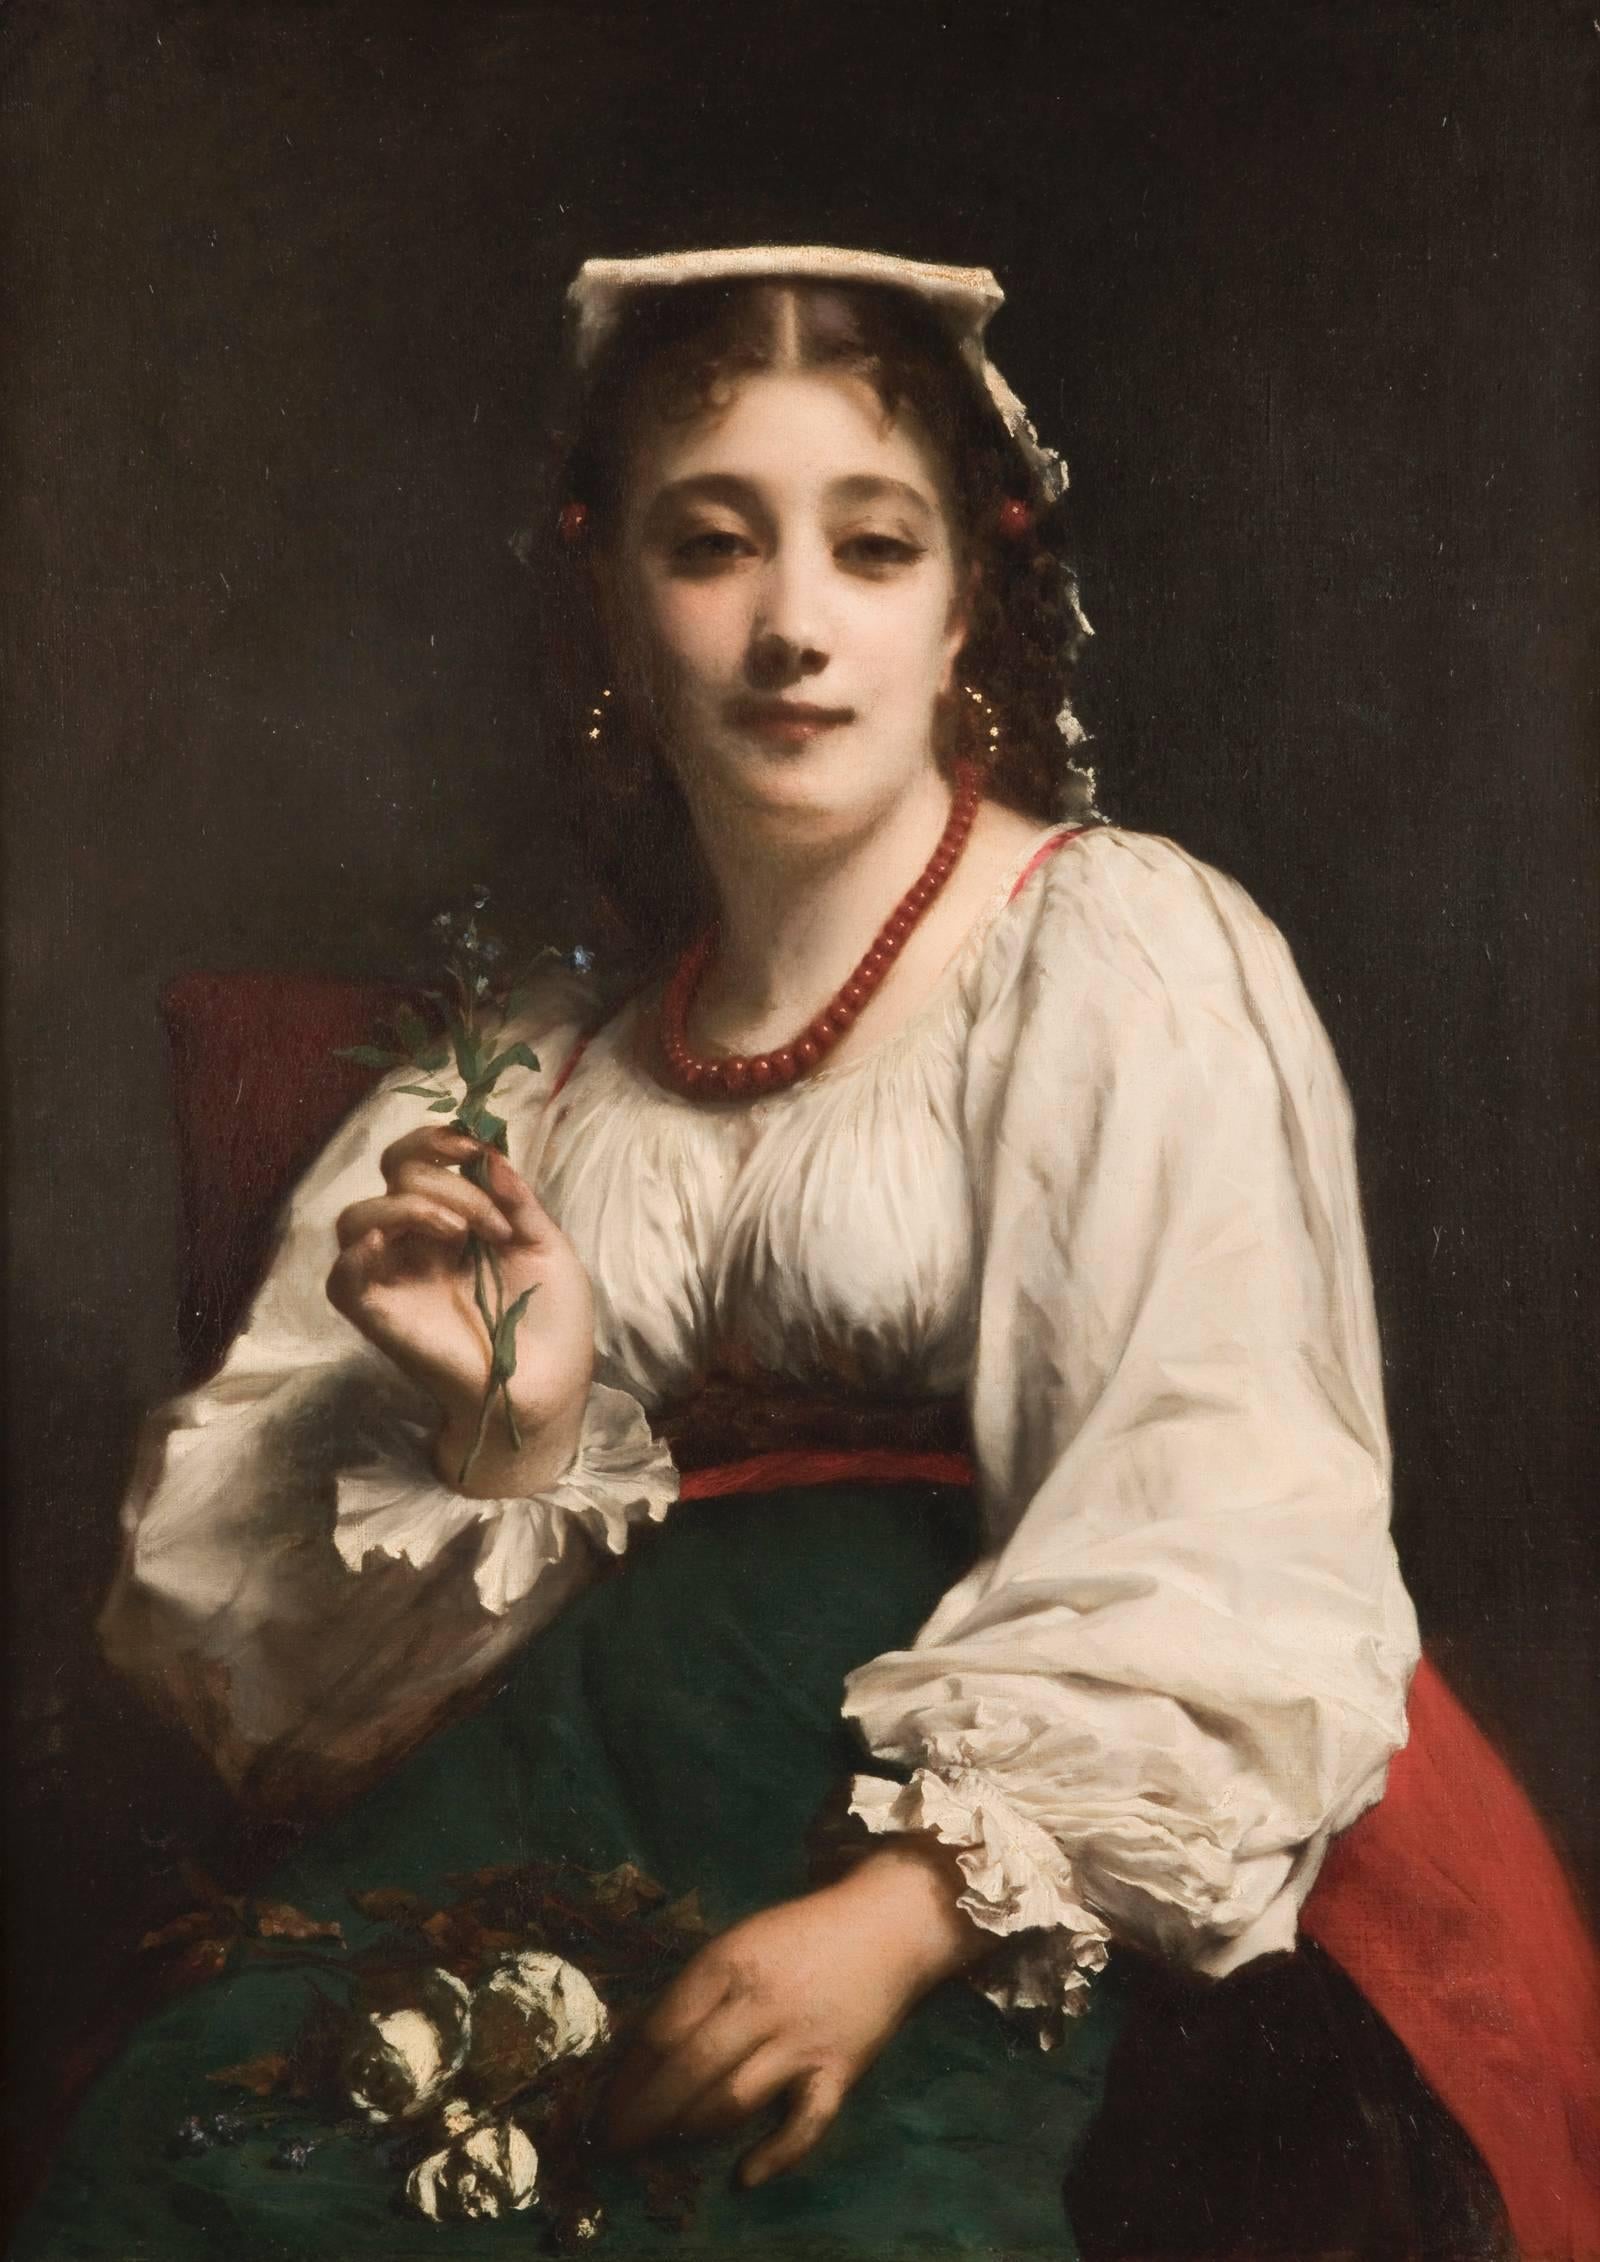 A 19th century portrait of an Italian woman set against a dark background with a raised hand holding forget-me-nots and white roses on her lap. The depiction of expressive 'beauties' was a common subject for Piot; beautiful women with an elegant and